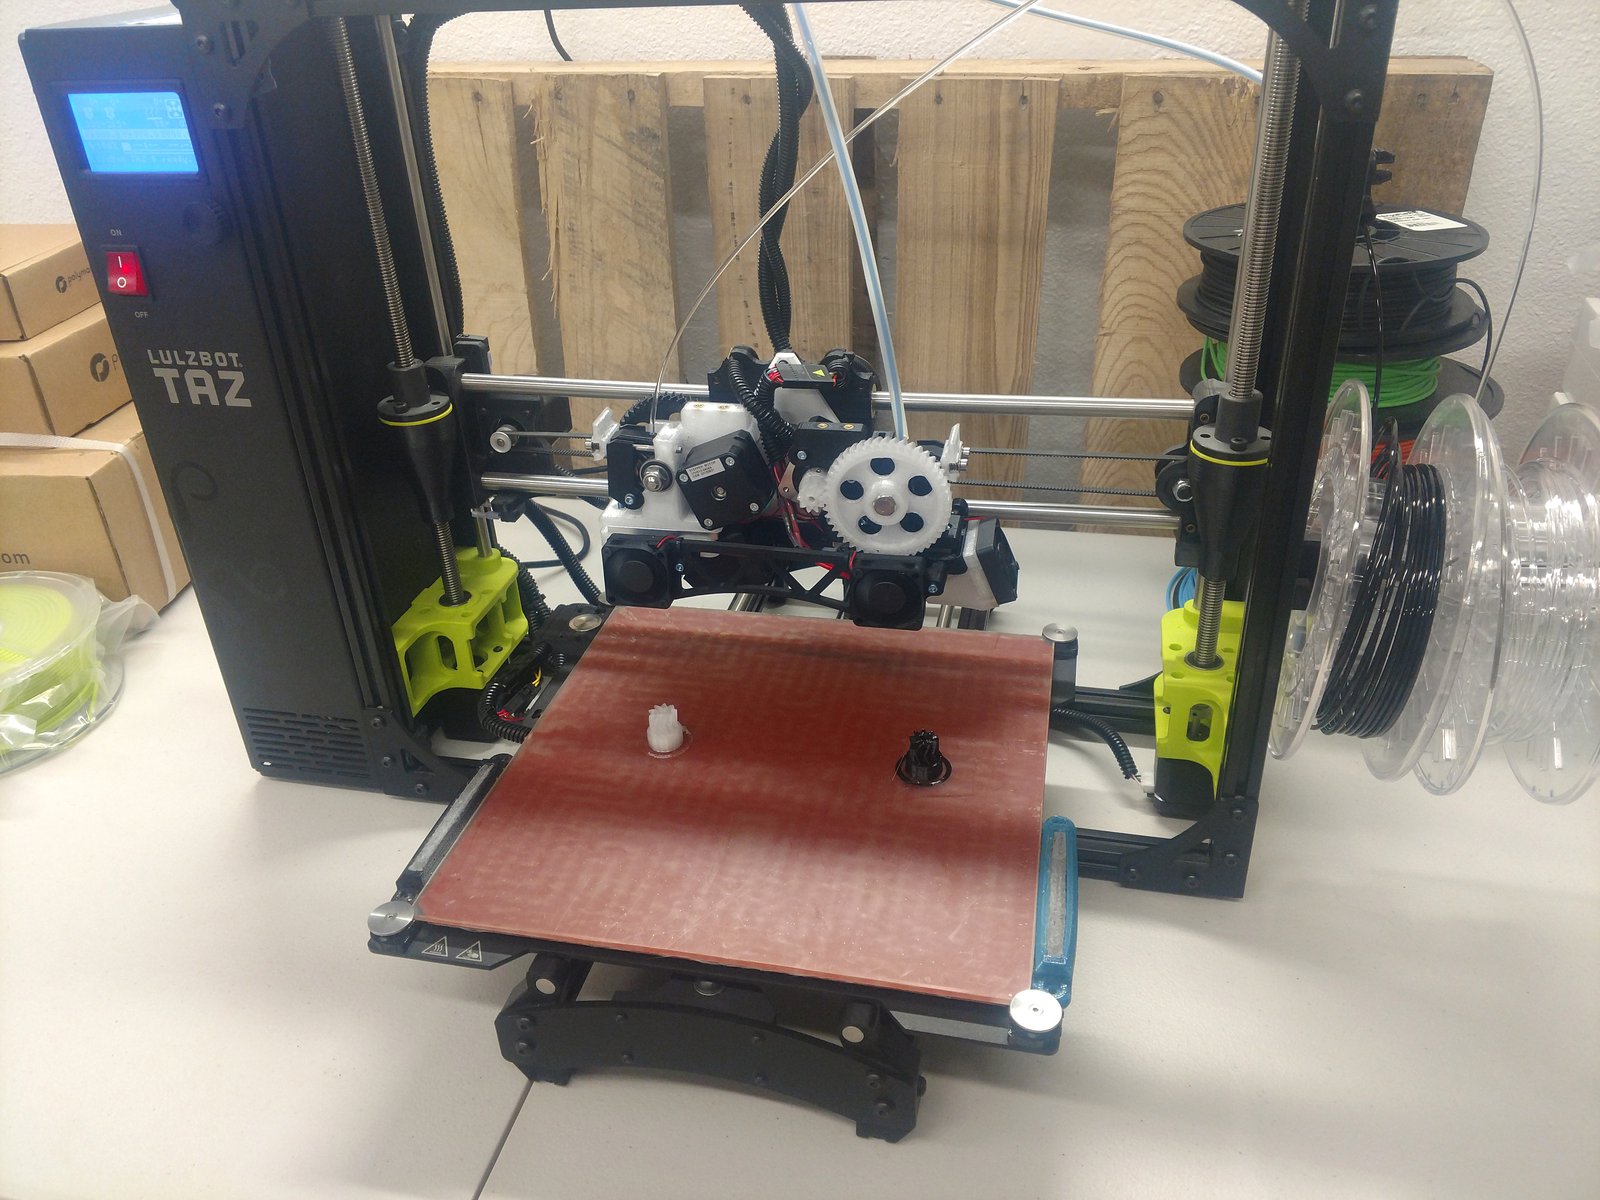 Using Twoolhead to print gears